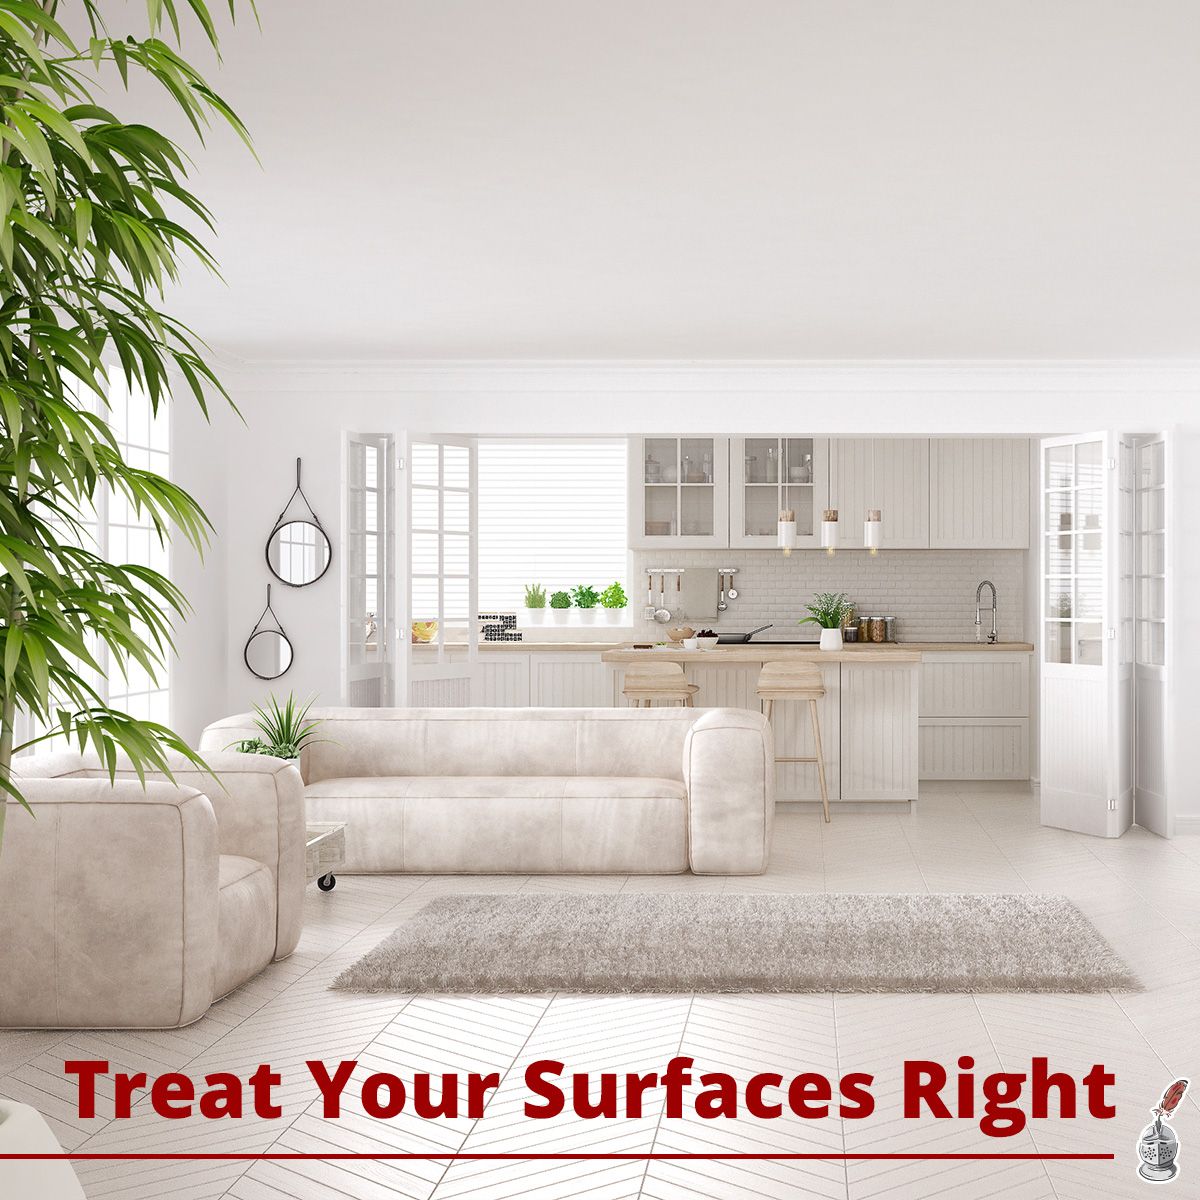 Treat Your Surfaces Right